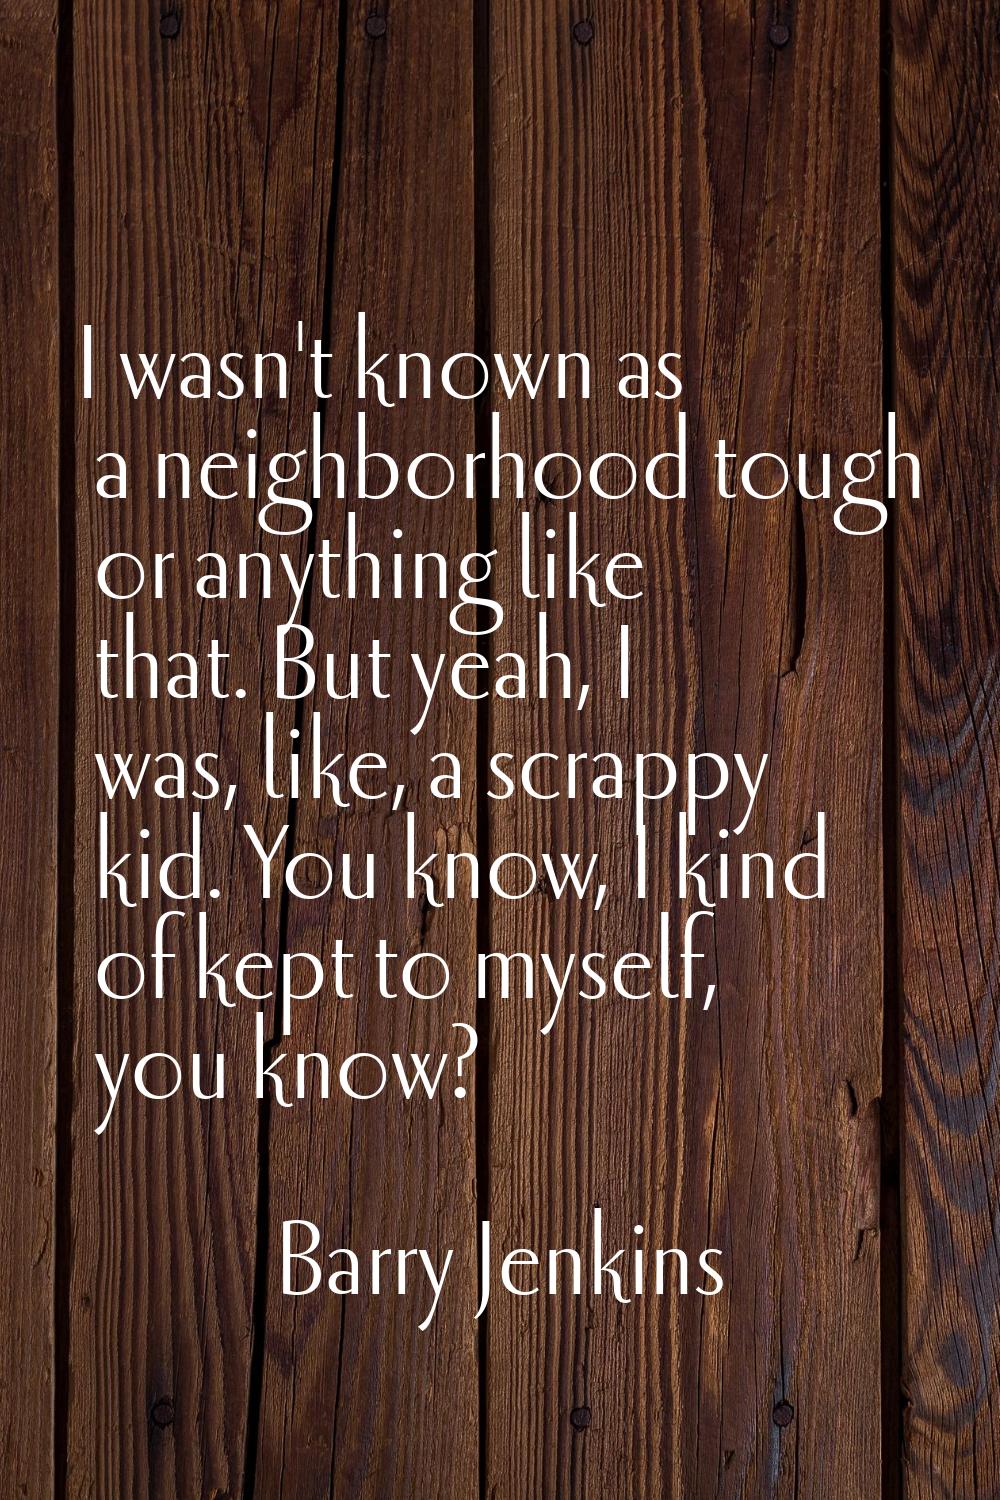 I wasn't known as a neighborhood tough or anything like that. But yeah, I was, like, a scrappy kid.